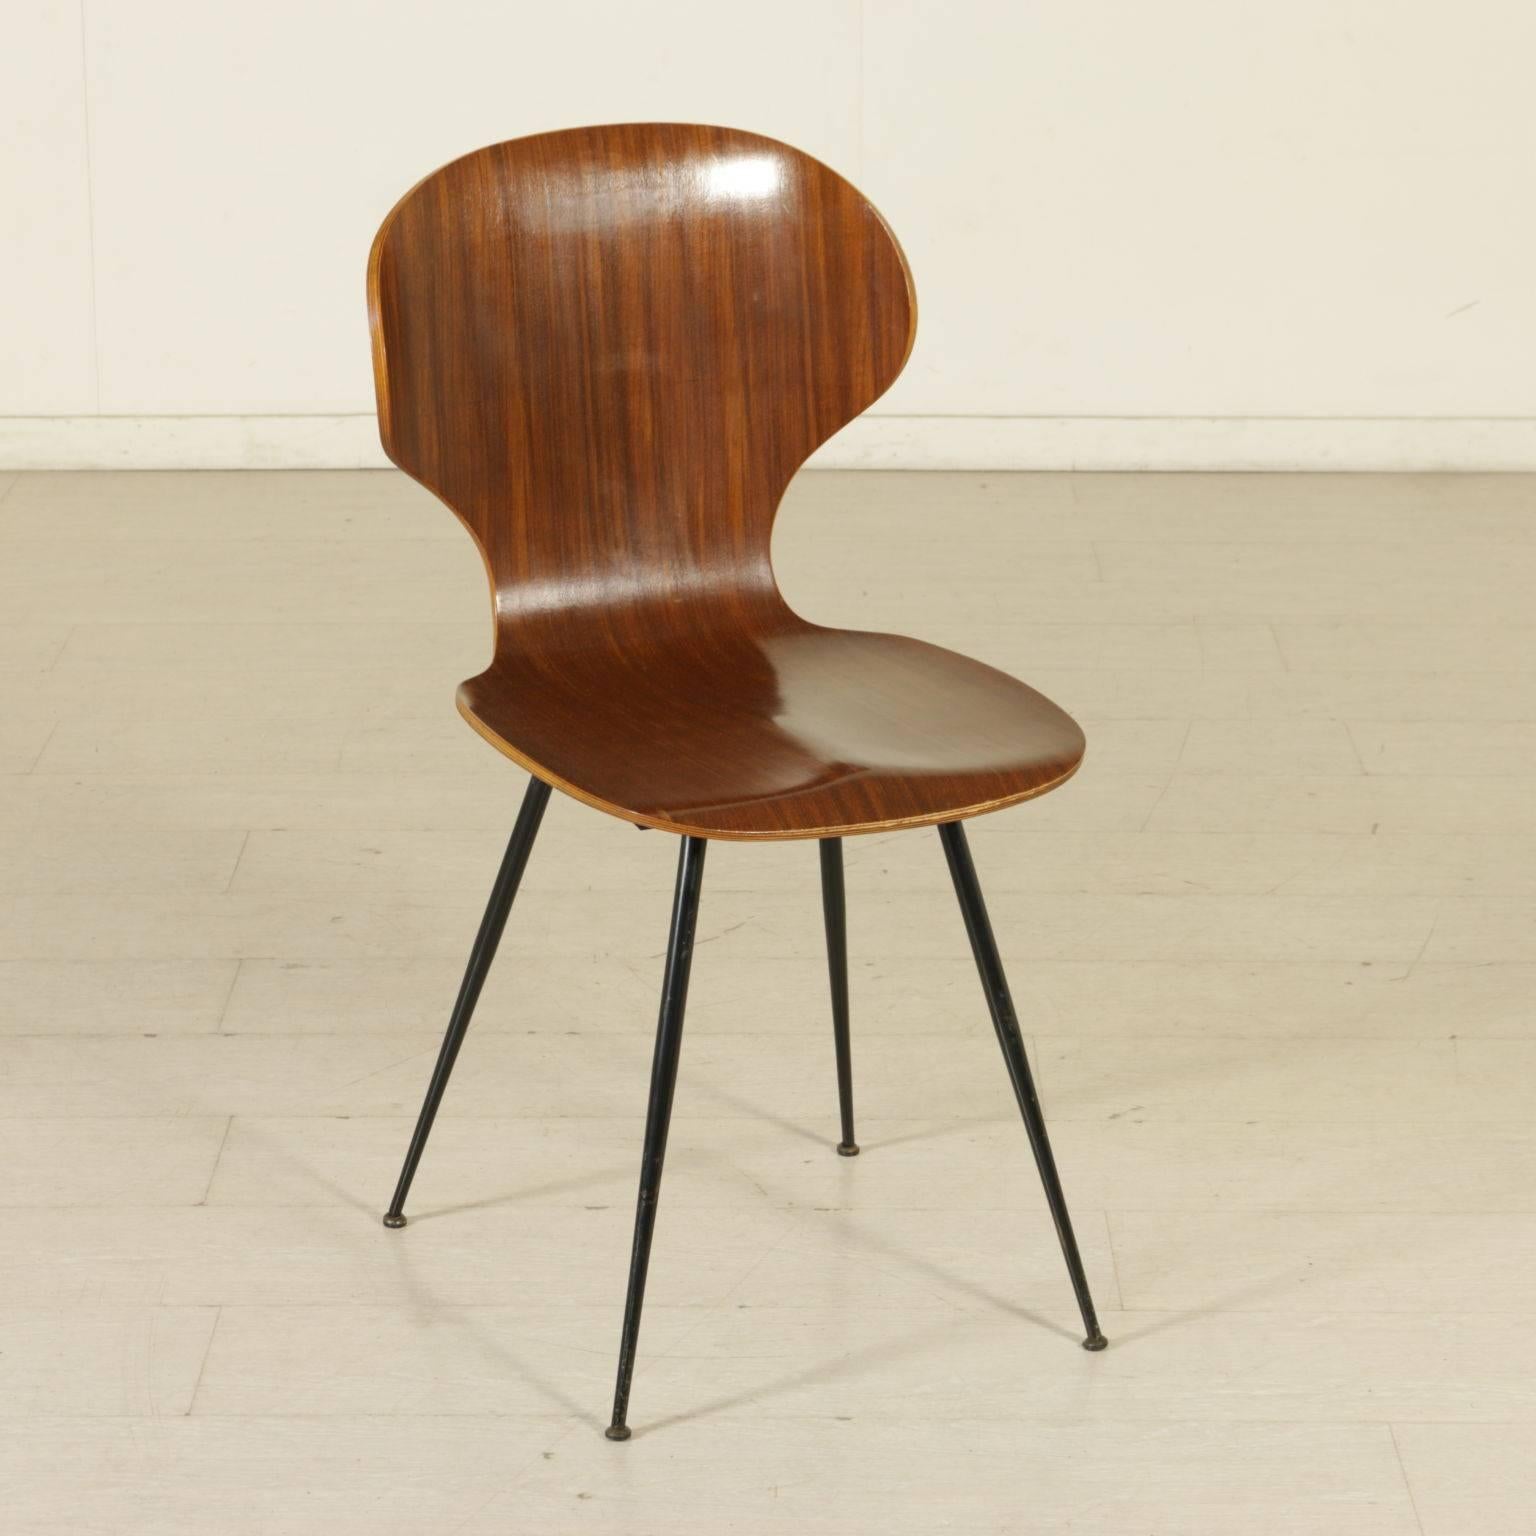 A group of four chairs designed by Carlo Ratti for Industria Legni Curvati. Bent plywood, lacquered metal. Model: Lulli. Manufactured in Italy, 1950s.